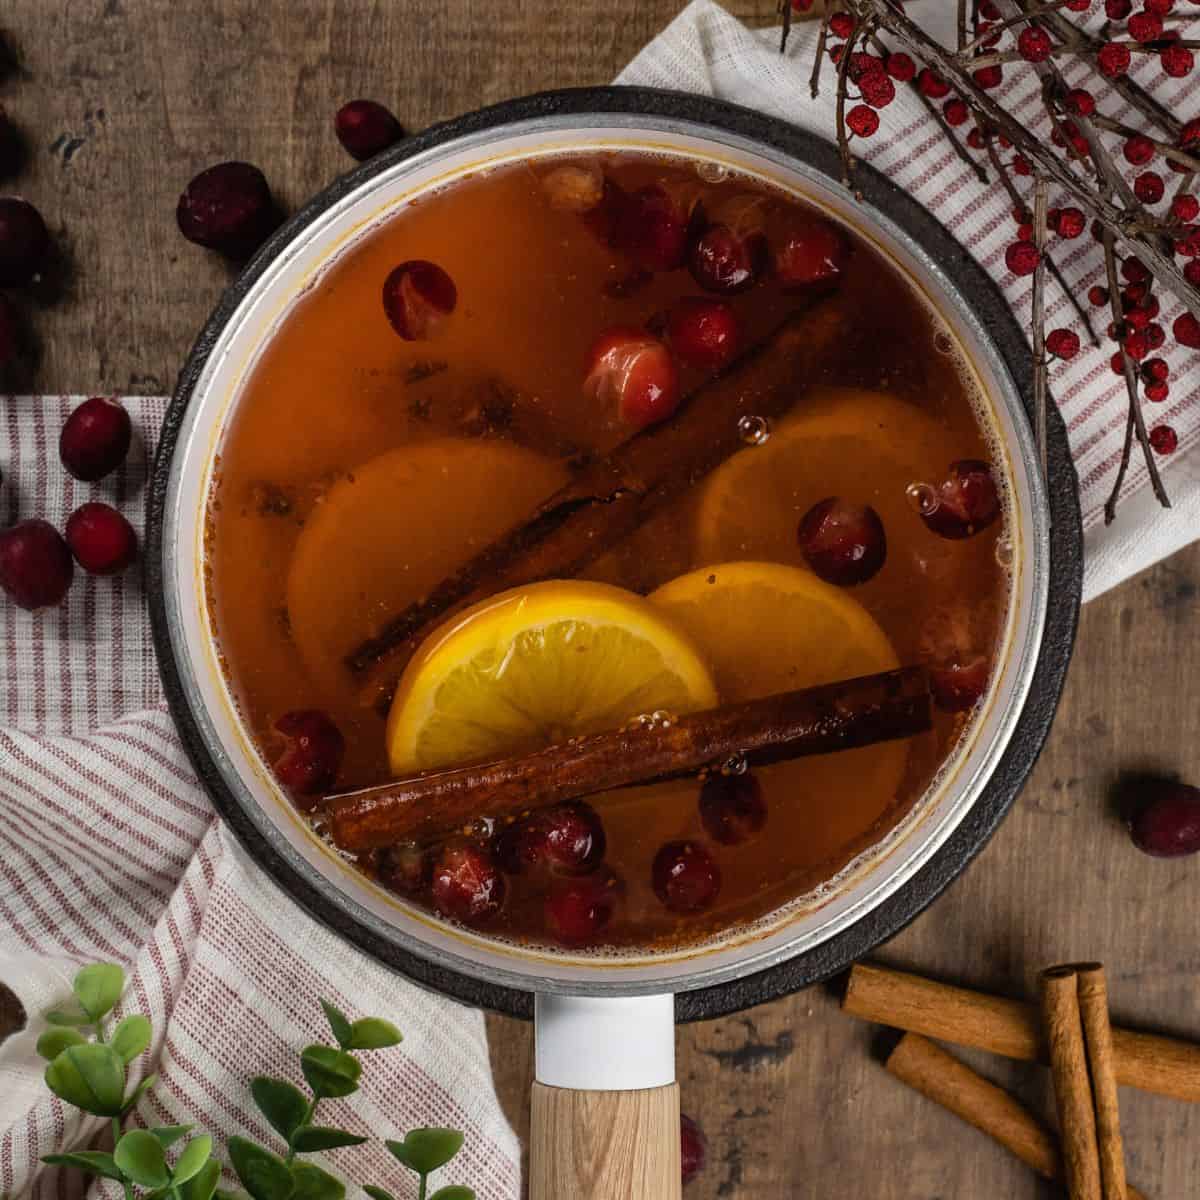 A white pot is filled with orange slices, cinnamon sticks, and other fresh whole spices. A red and white stripe towel is under the pot. More cranberries, cinnamon sticks, and greenery surround the pot.